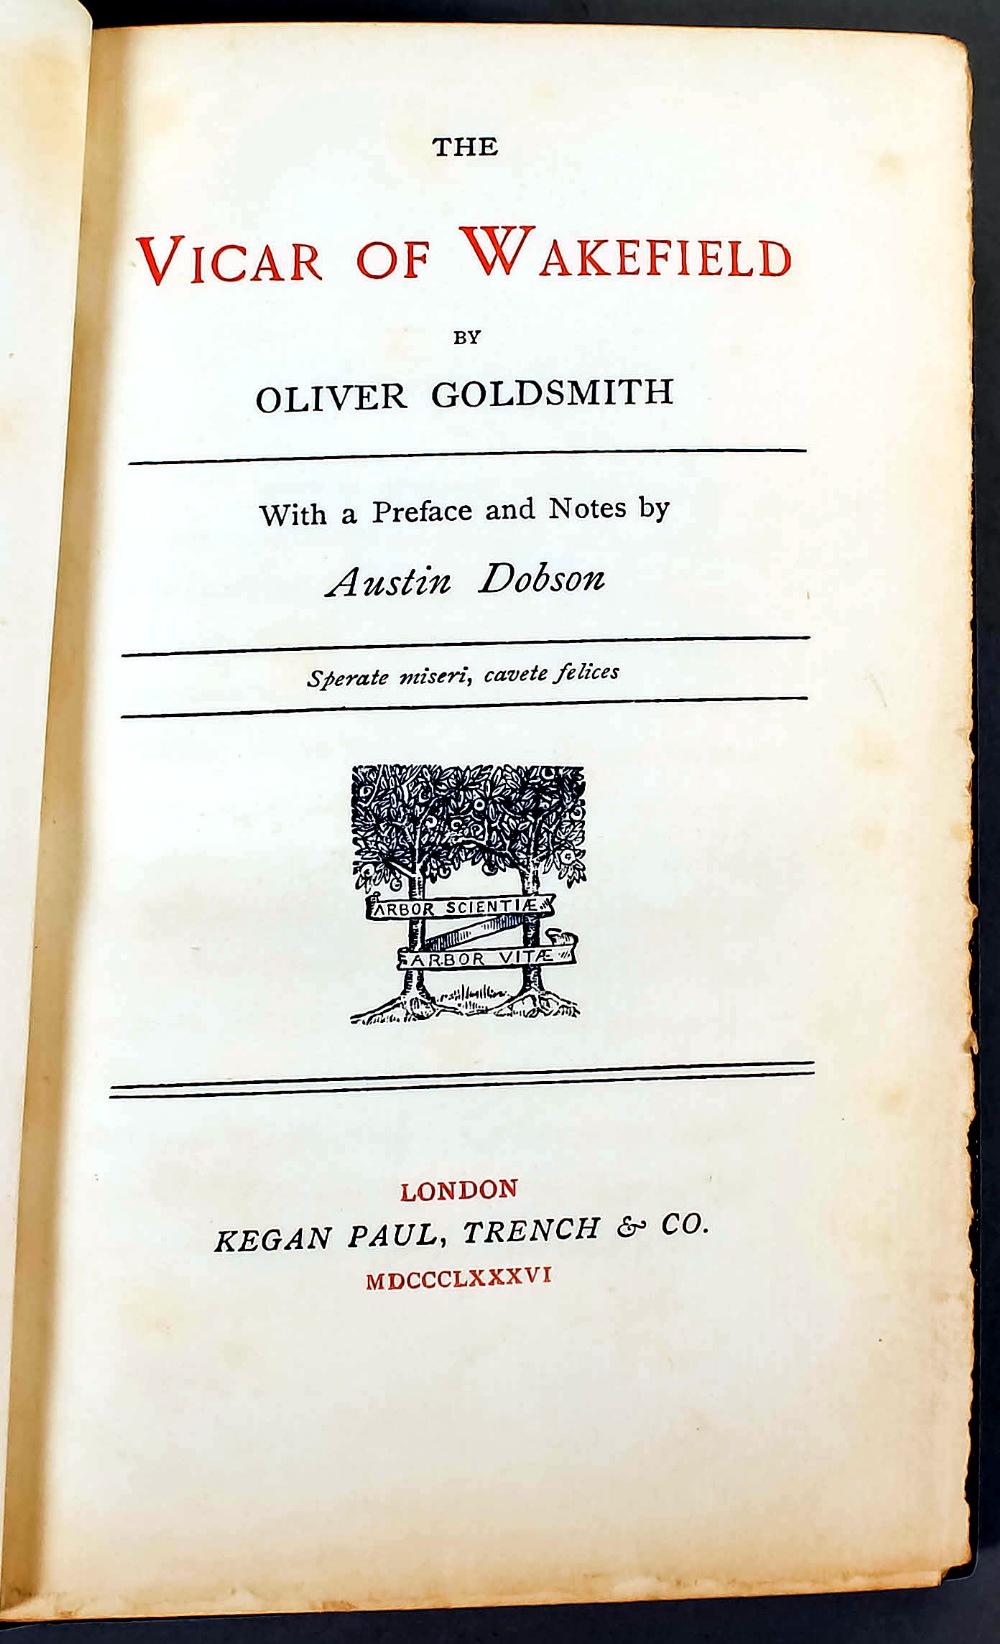 Oliver Goldsmith - "The Vicar of Wakefield", Kegan, Paul, Trench & Co, London 1886 (one leather